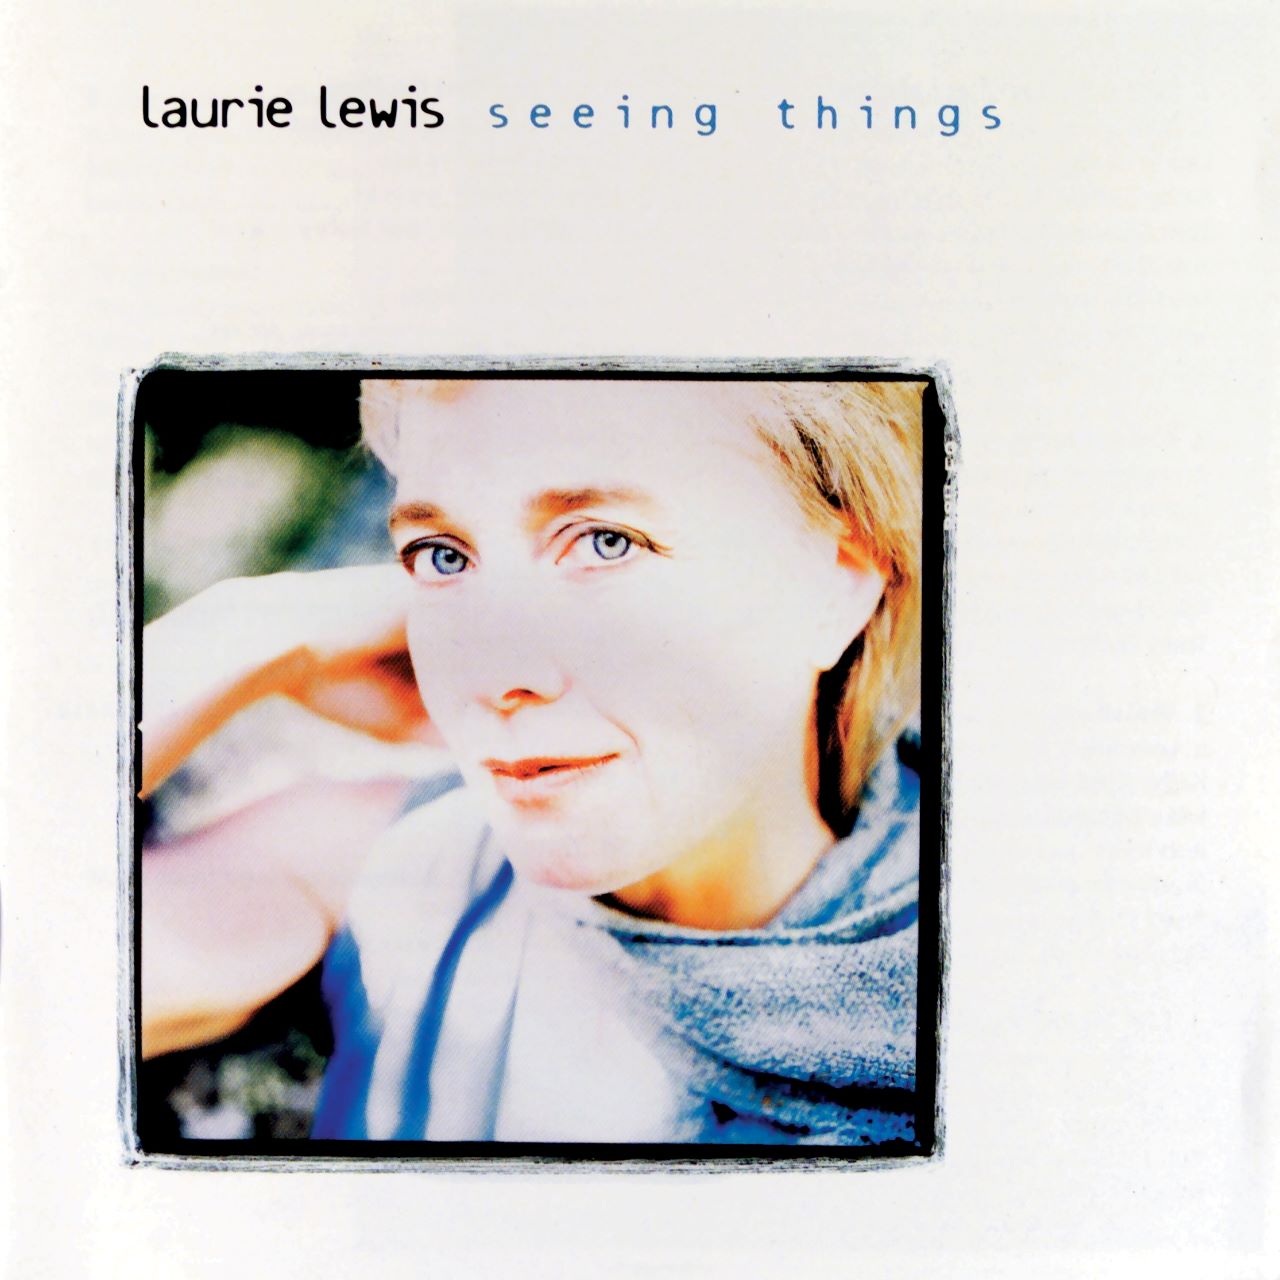 Laurie Lewis - Seeing Things cover album